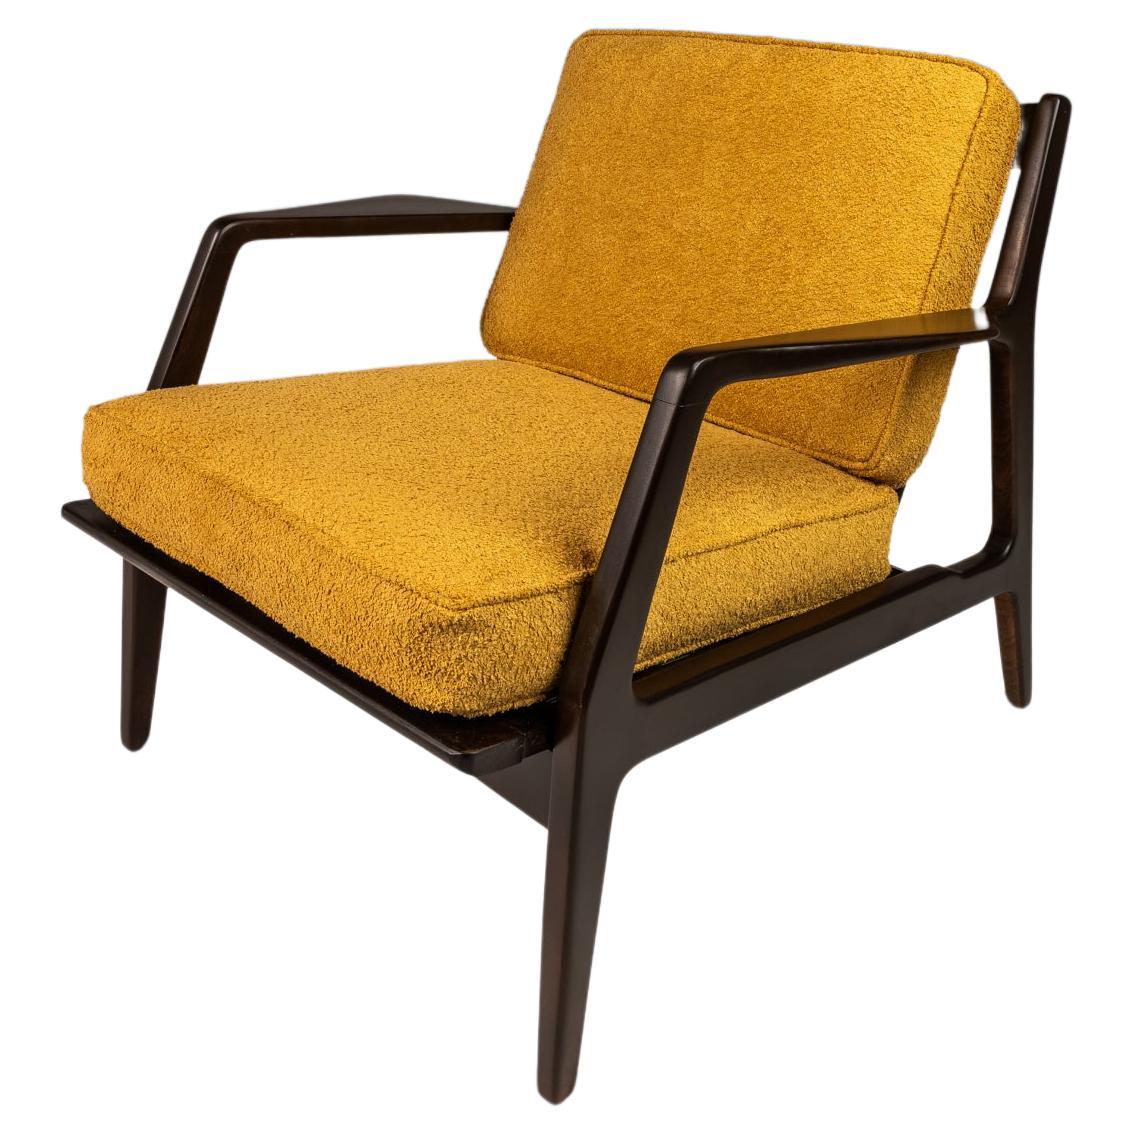 Model 596 Lounge Chair by Lawrence Peabody & Ib Kofod Larsen for Selig, c. 1950s For Sale